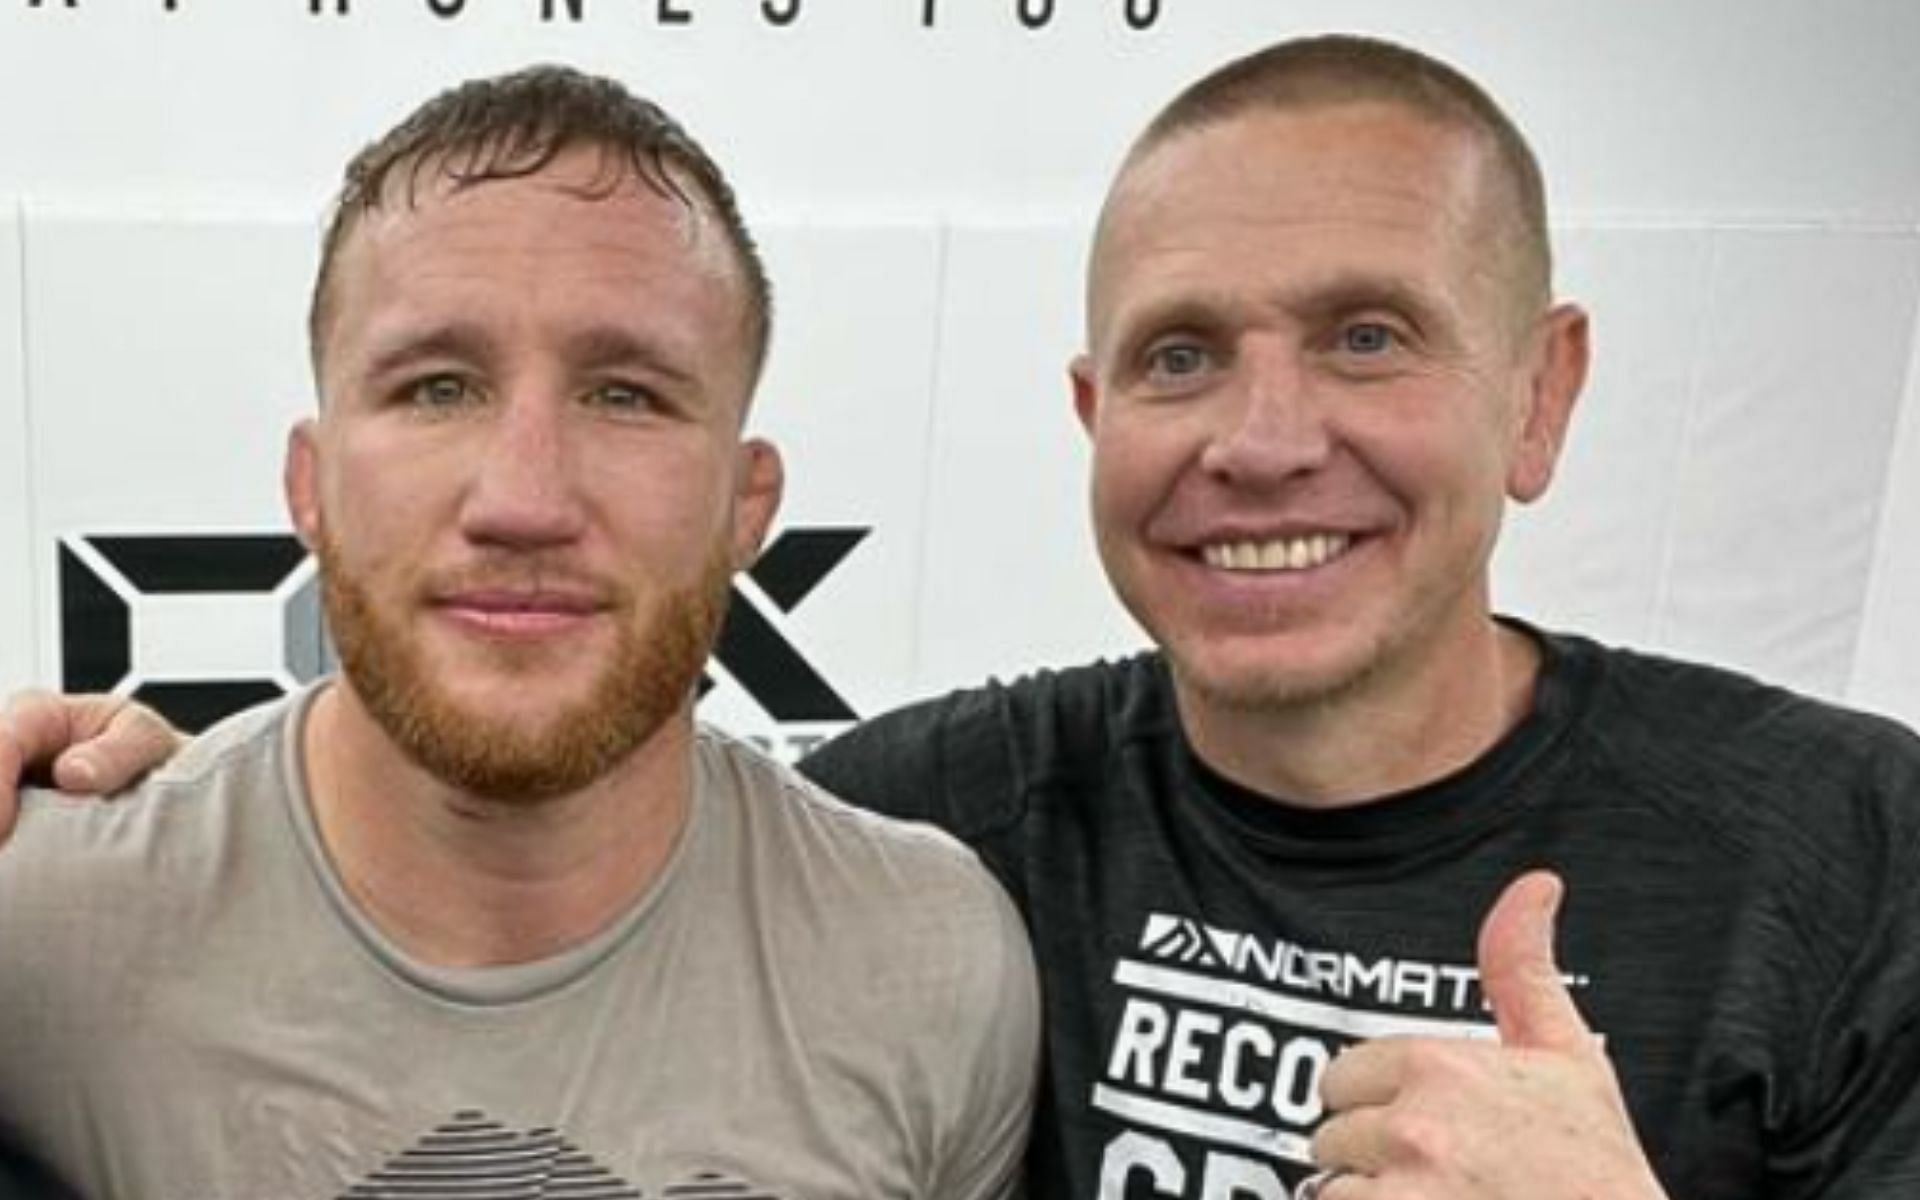 Justin Gaethje (left) with his long time coach Trevor Wittman (right) [Image courtesy @justin_gaethje on Instagram]